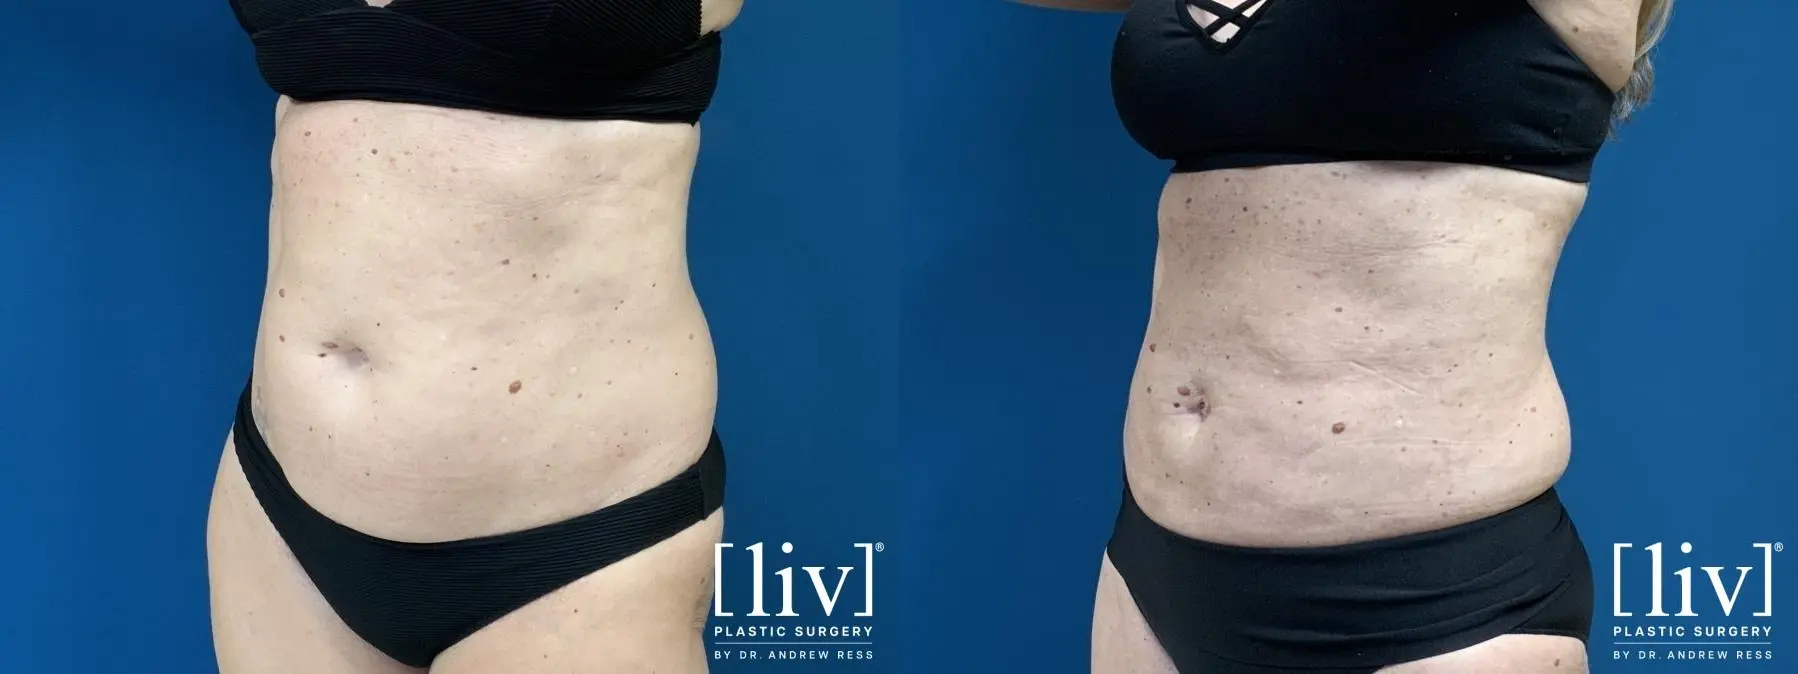 Liposuction: Patient 6 - Before and After 4